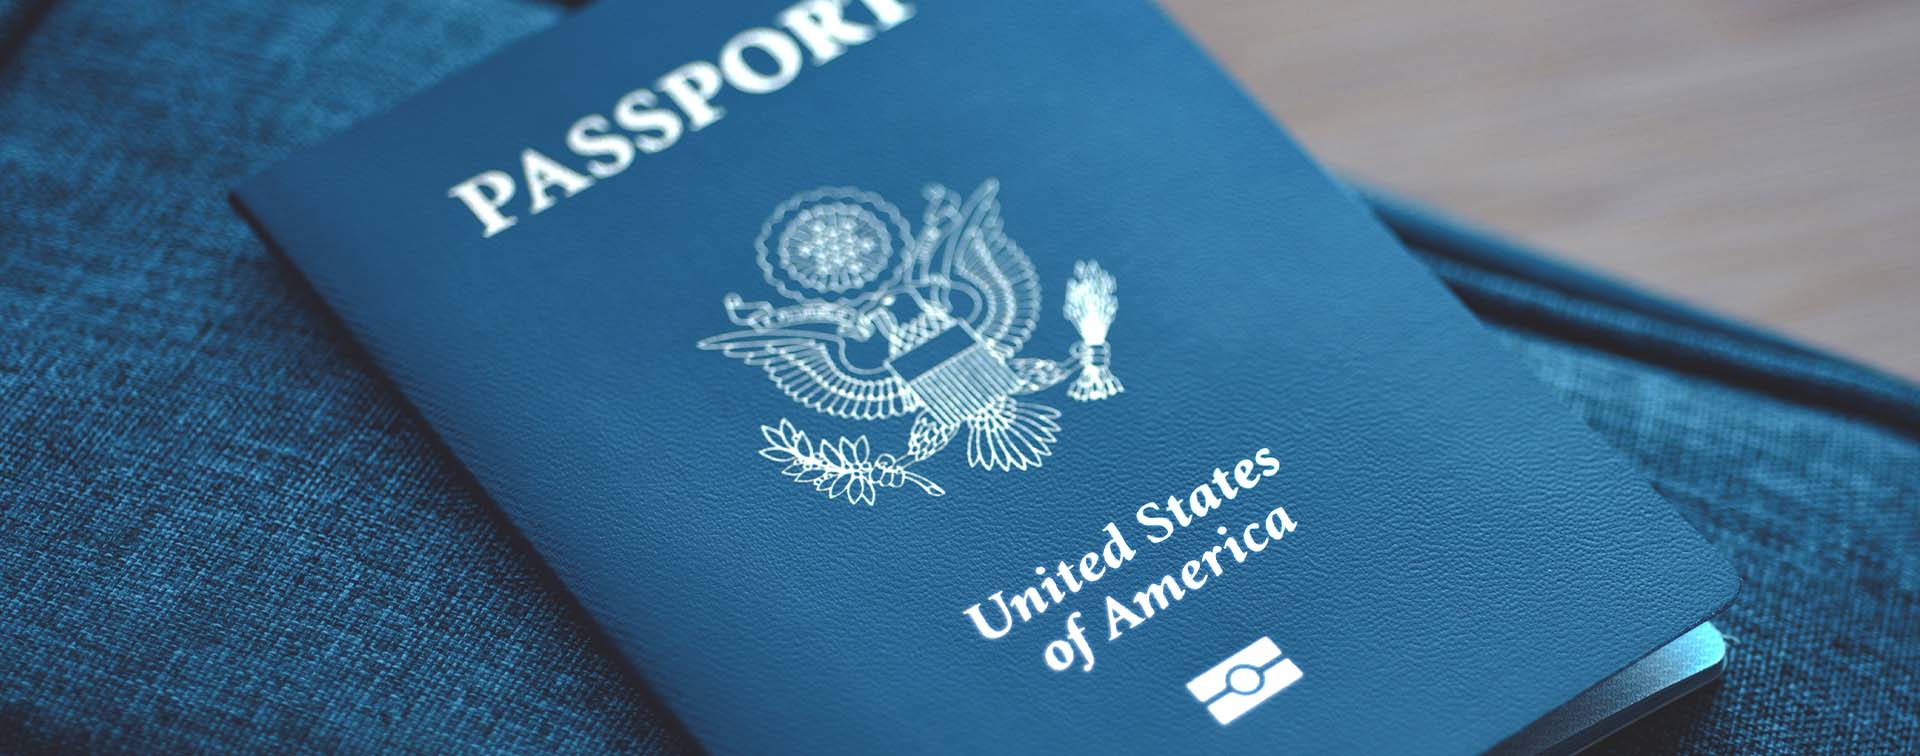 US passport on a blue travel bag against a wooden floor